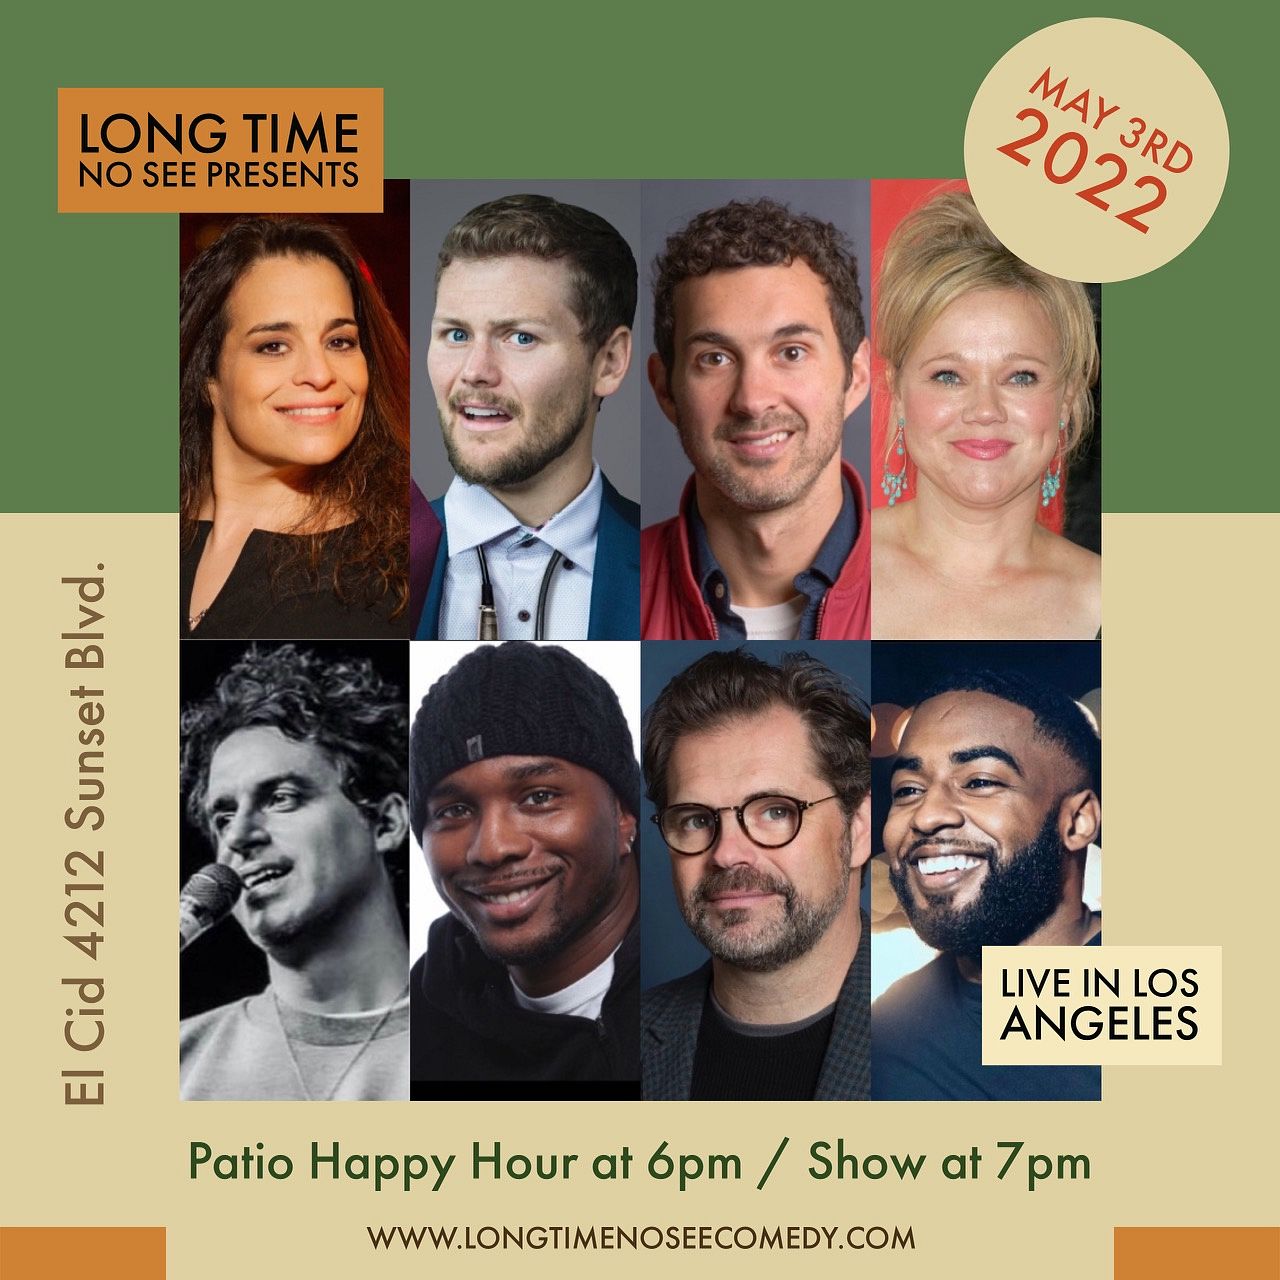 Live StandUp Comedy Tickets at El Cid in Los Angeles by Long Time No